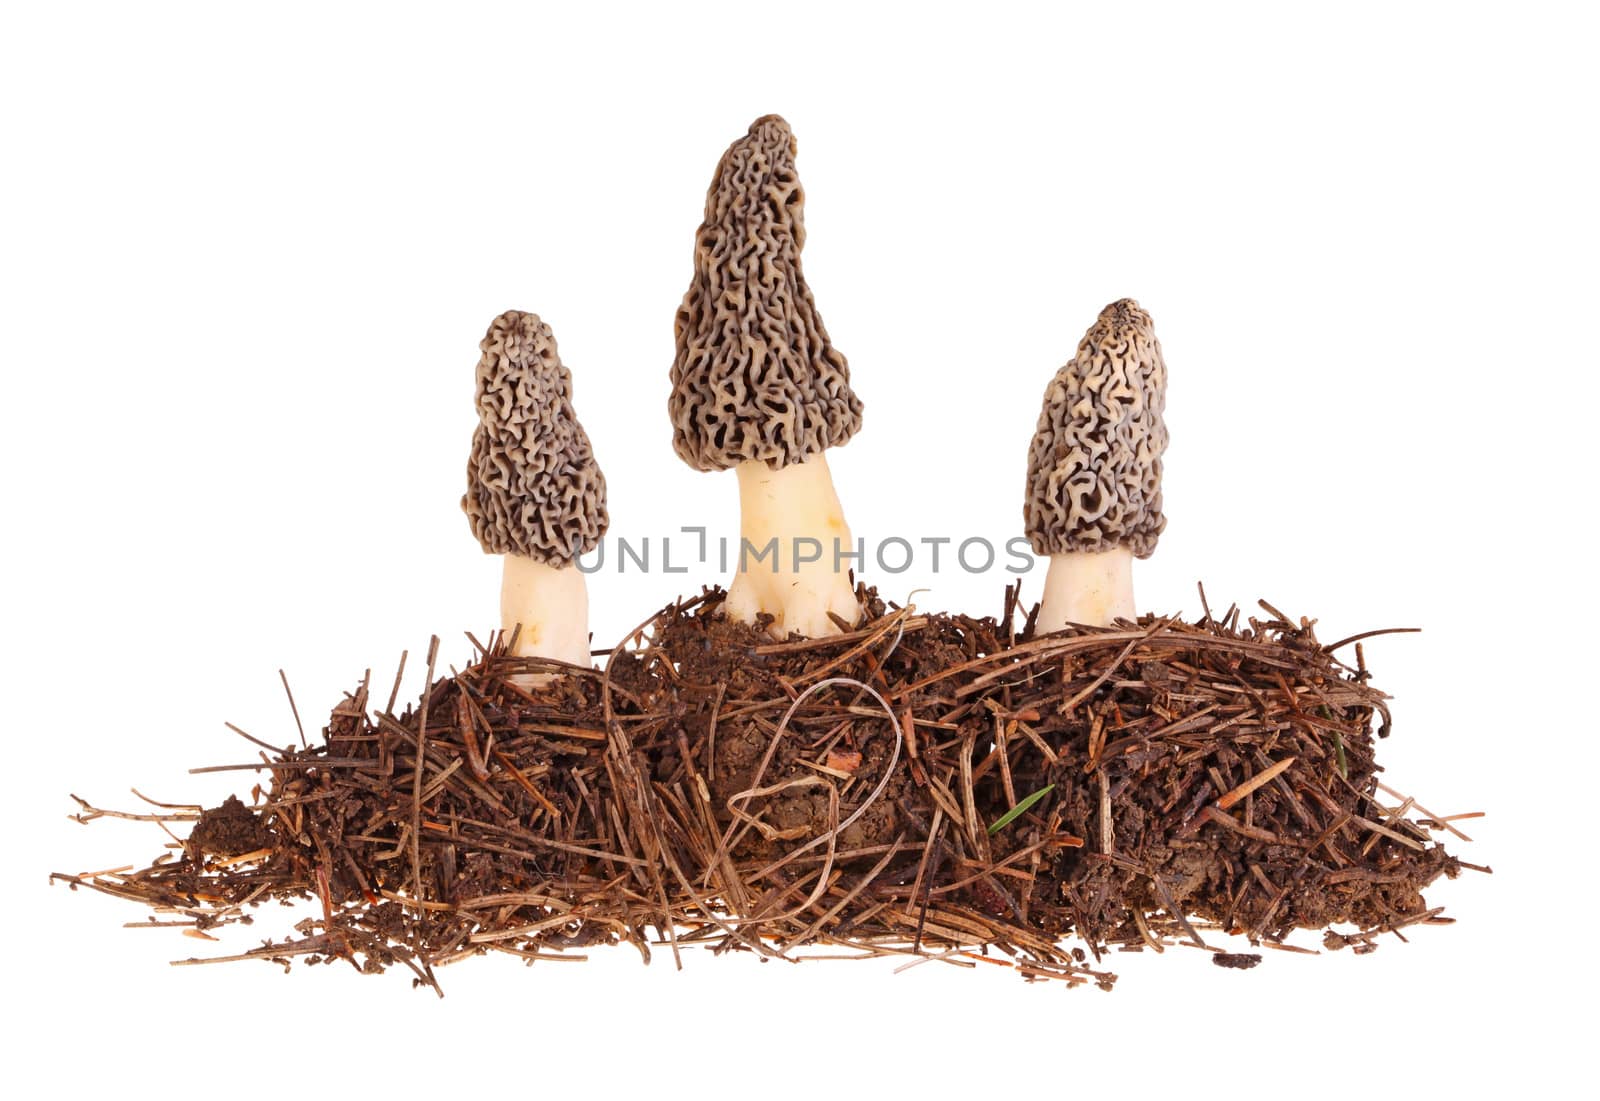 Three gray morel mushrooms (Morchella esculenta or esculentoides) and part of their soil substrate isolated against a white background